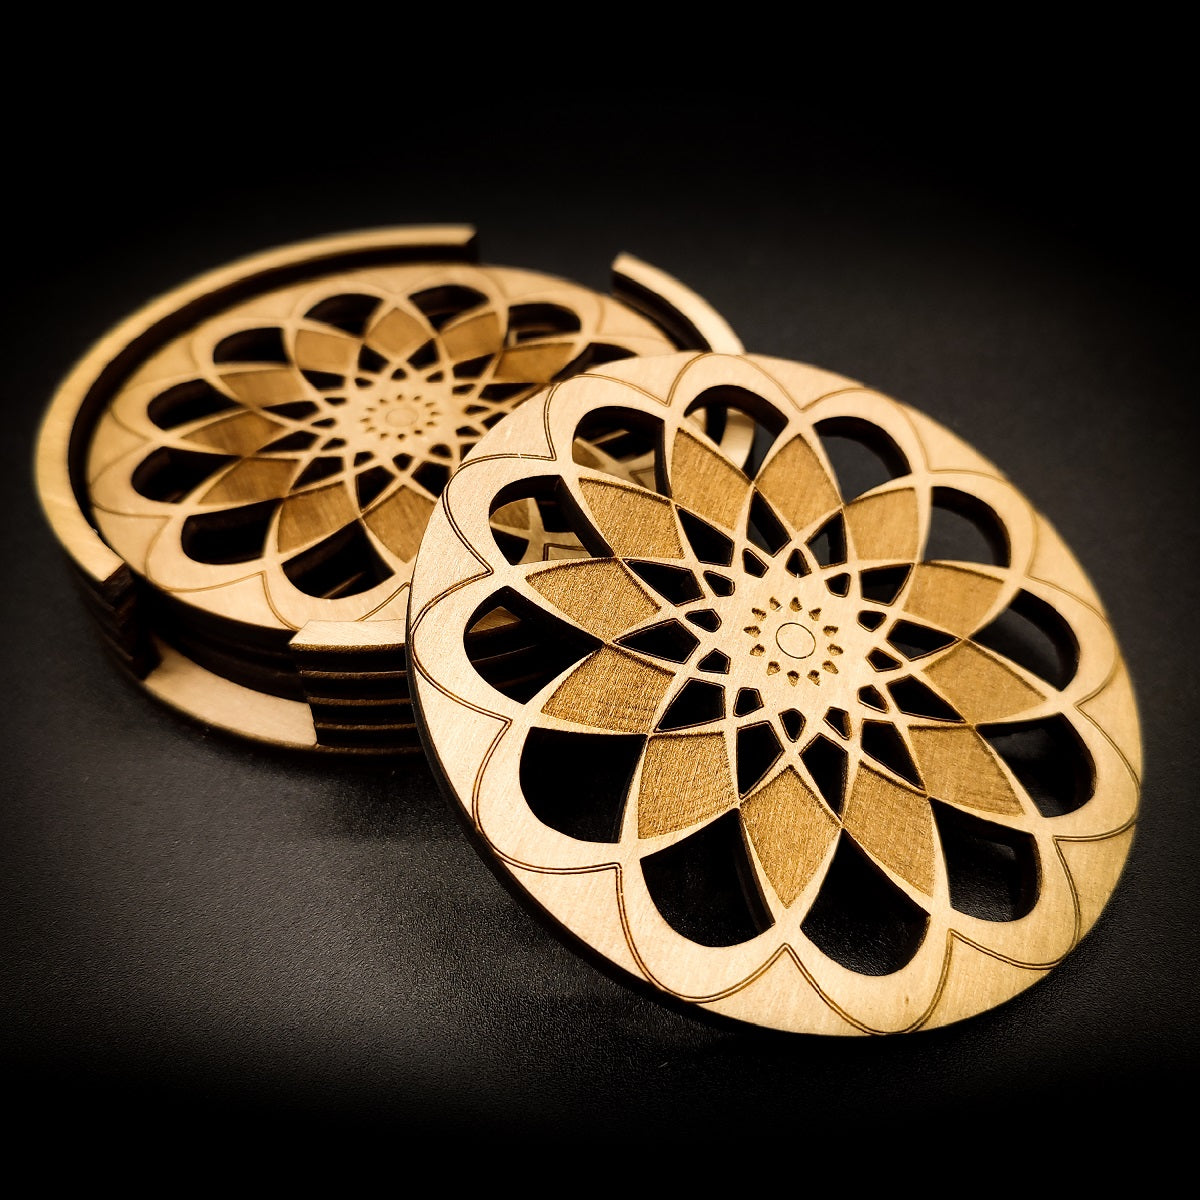 Set of 4 Rosace Mandala coasters with its wooden stand